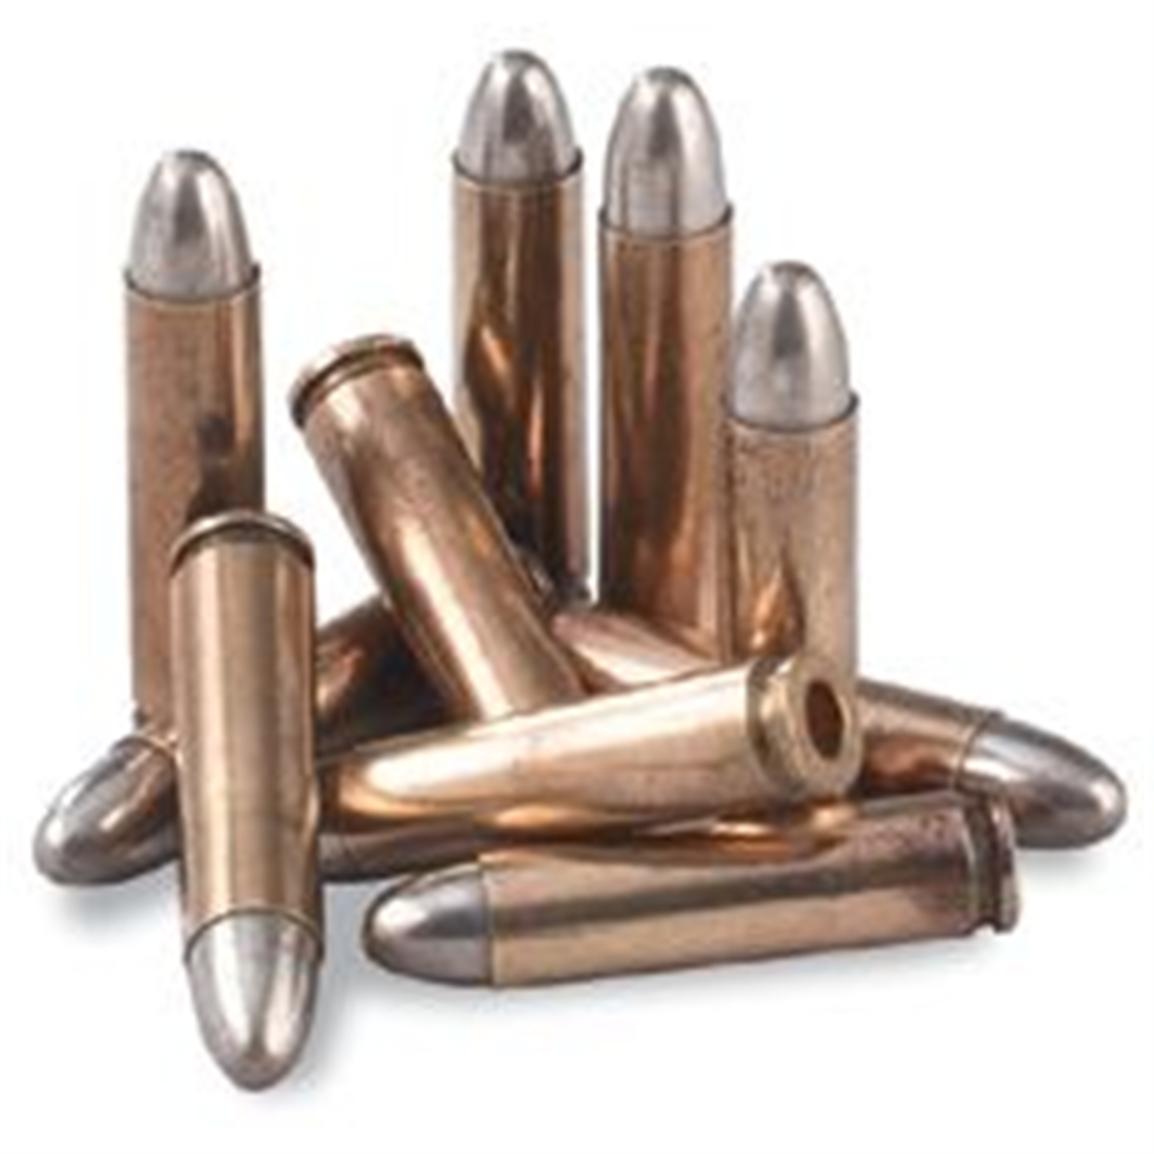 10 Pack New 30 Cal Carbine Dummy Rounds 71271 At Sportsmans Guide 8381